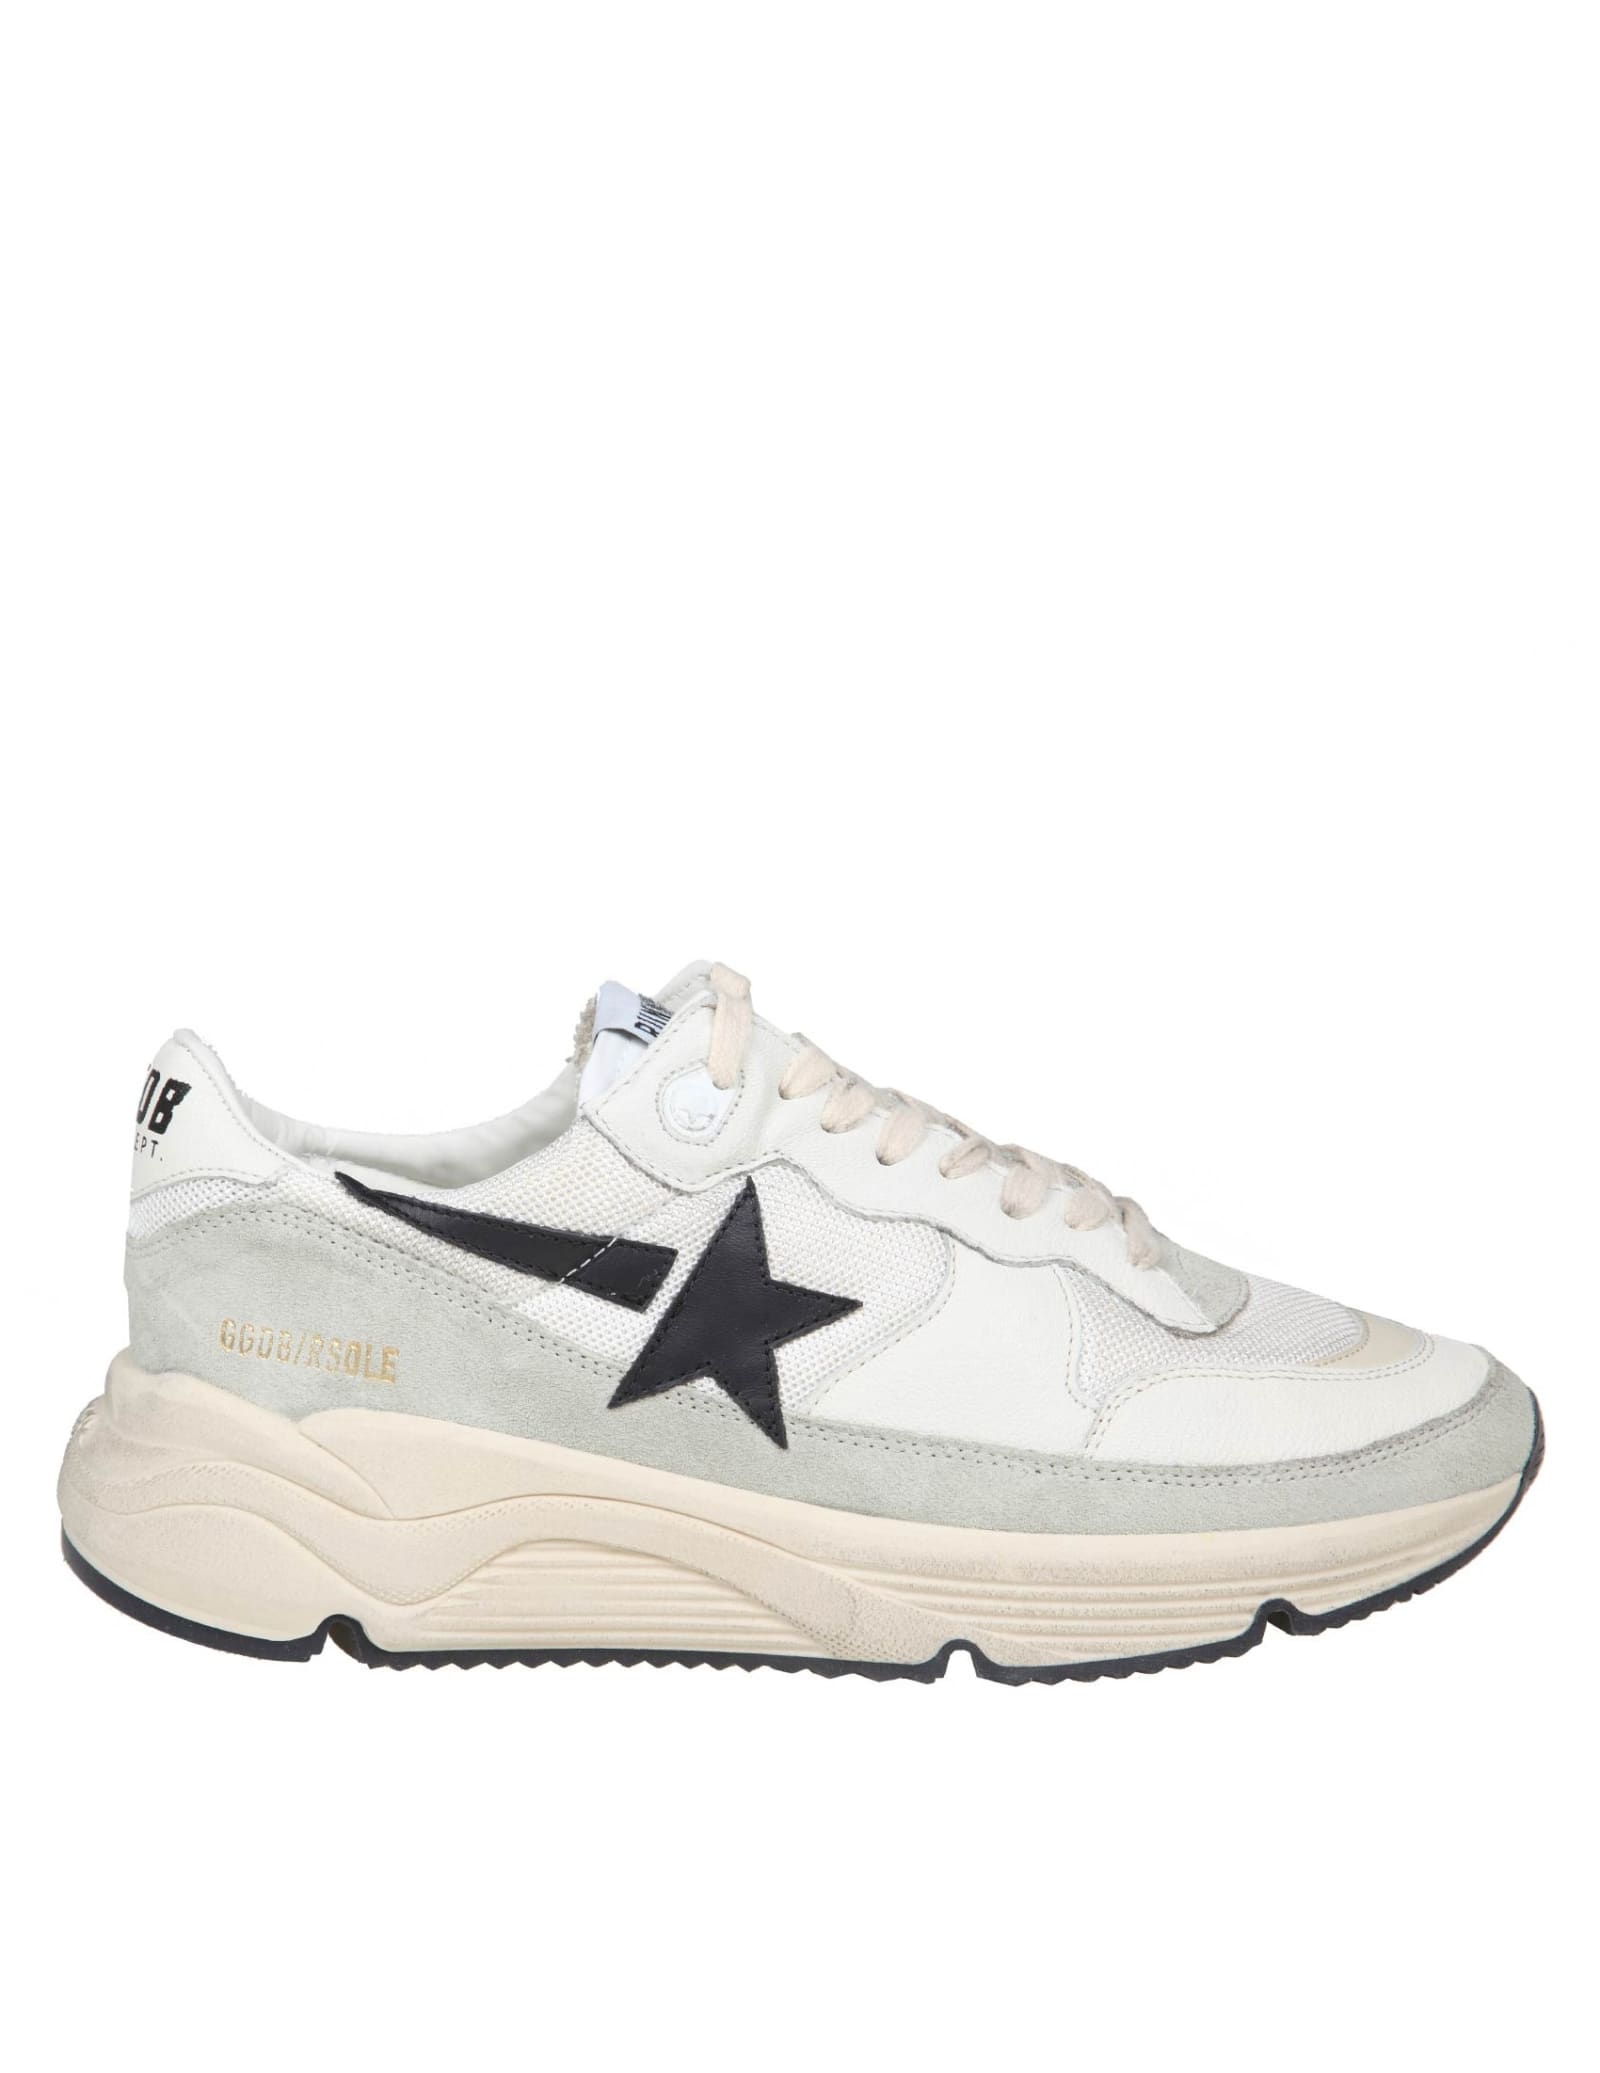 GOLDEN GOOSE GOLDEN GOOSE RUNNING SOLE trainers IN BLACK AND WHITE LEATHER AND FABRIC